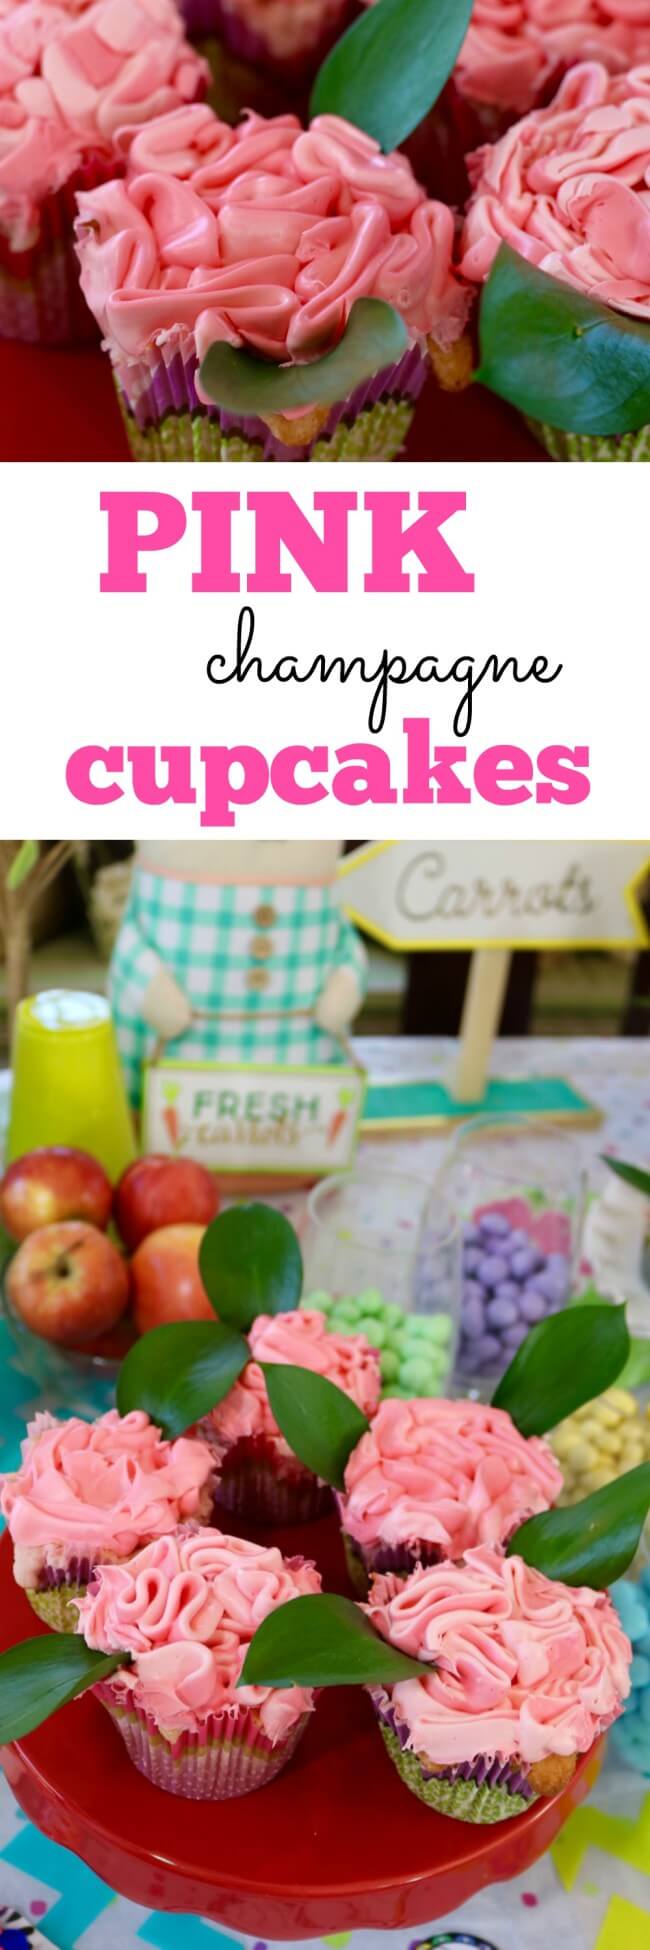 Pink Champagne cupcakes recipe